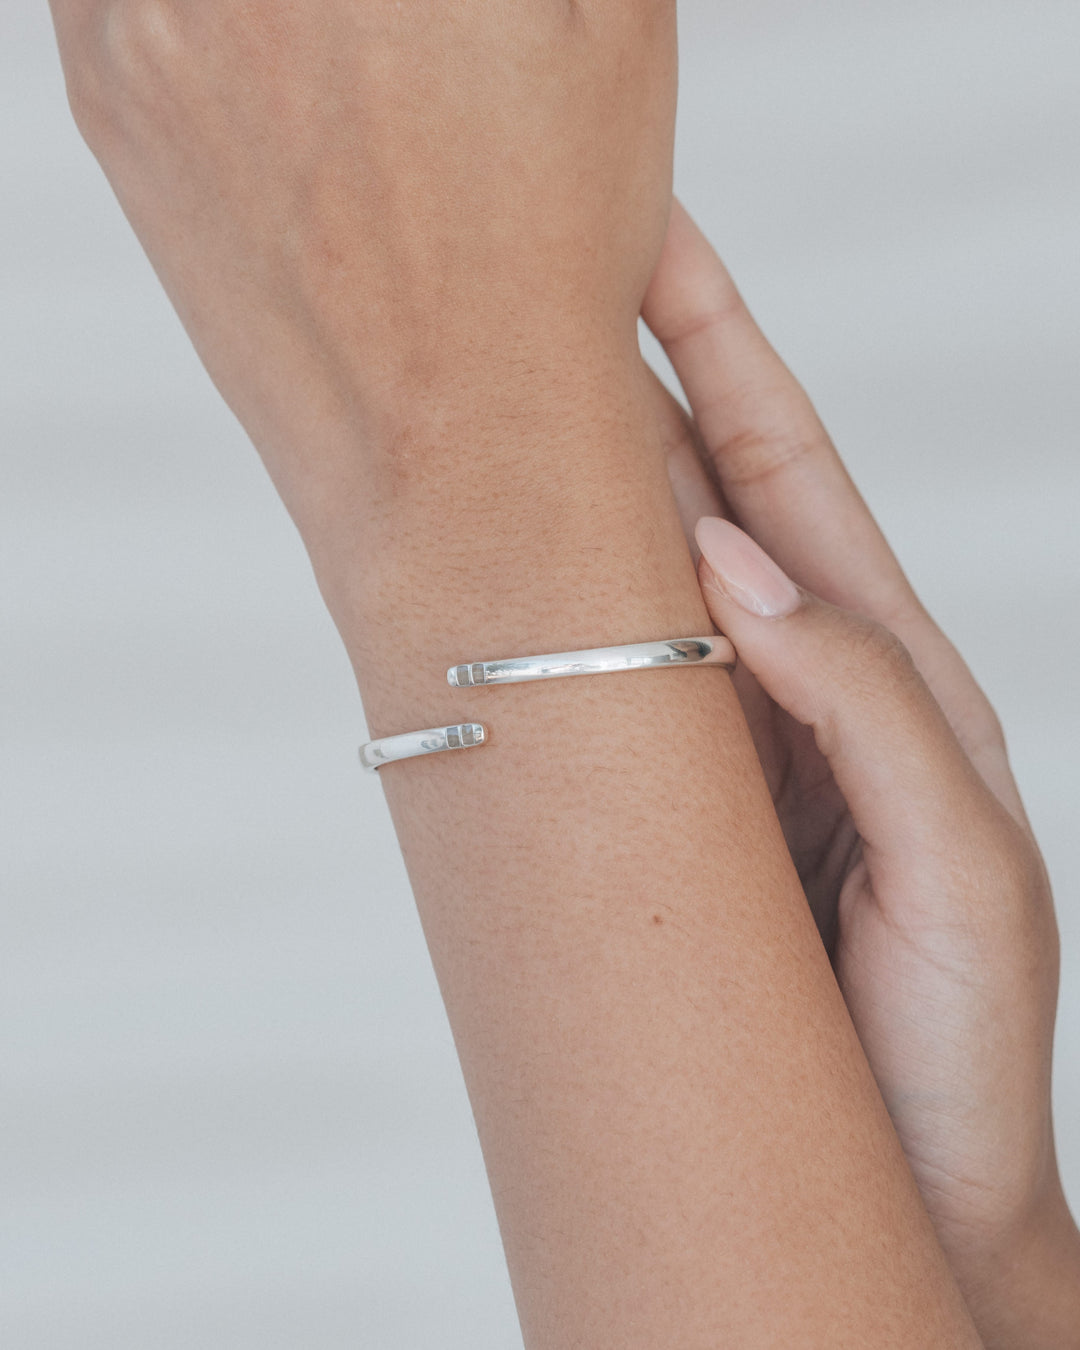 A photo showing the bypass hinged cuff bracelet with cremains on a model's wrist held up against a white background